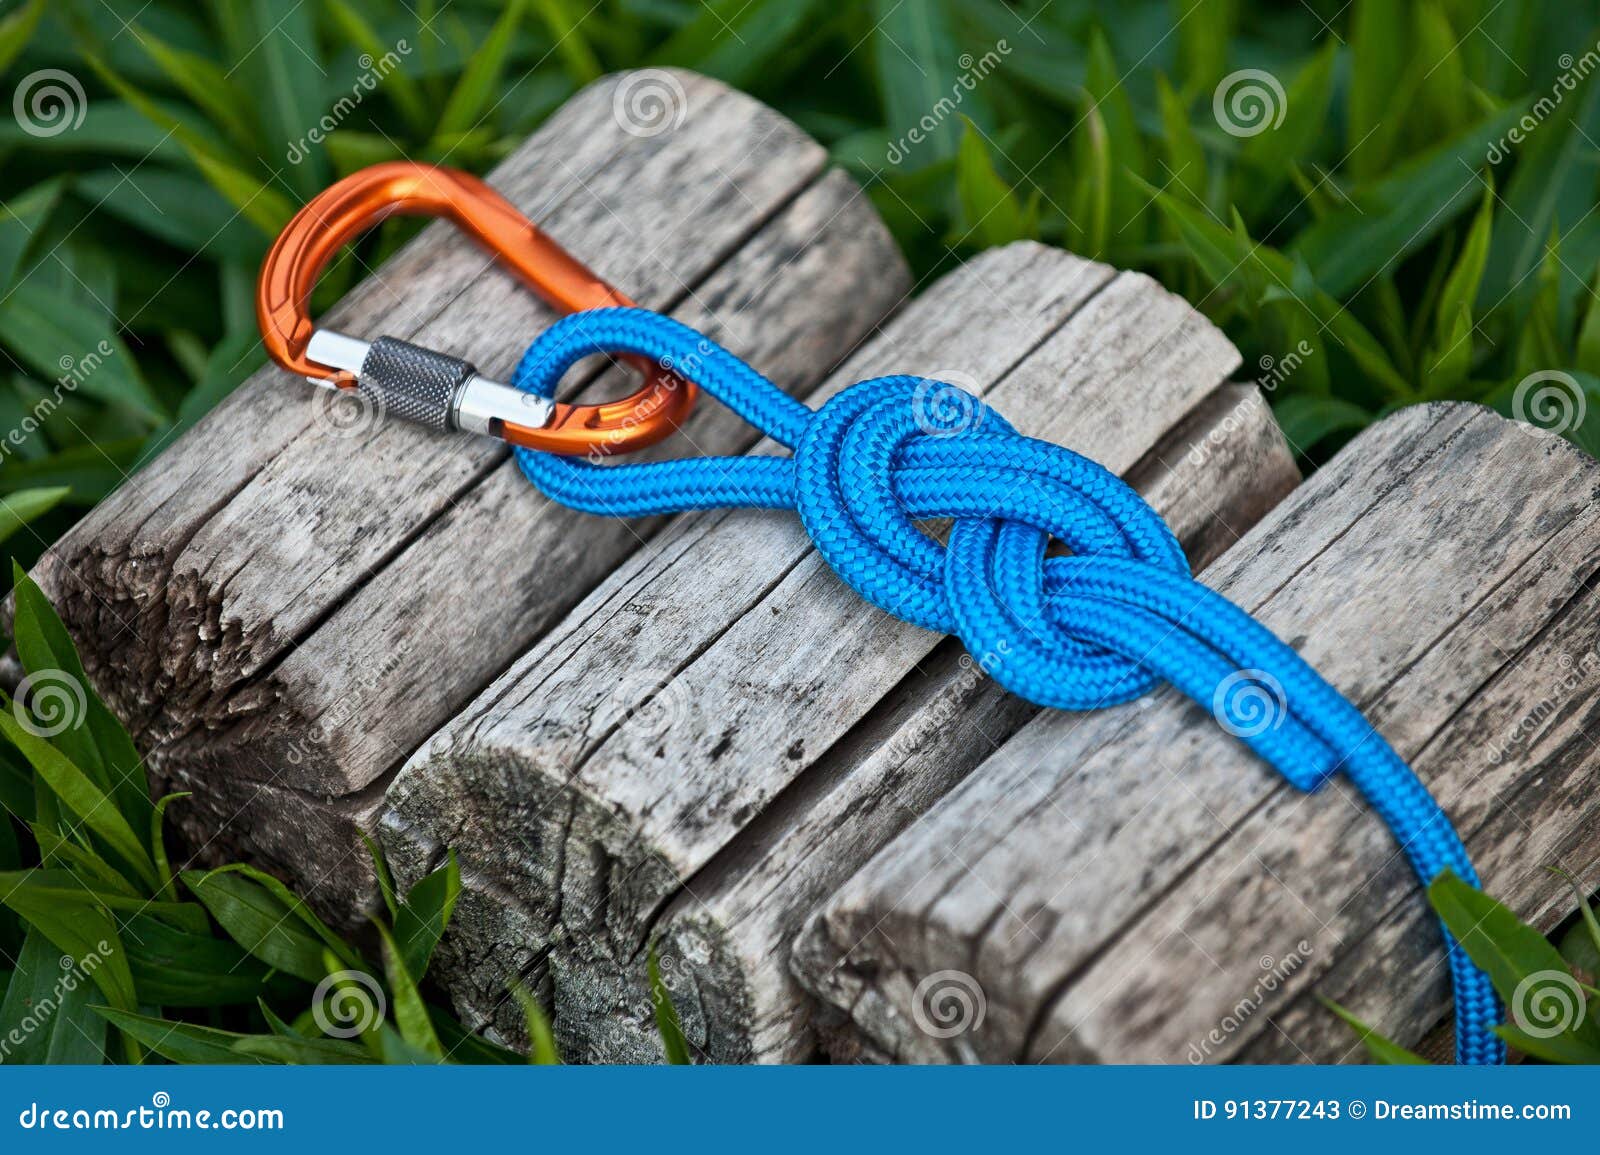 Figure Eight Knot with a Carabiner. Stock Image - Image of knot